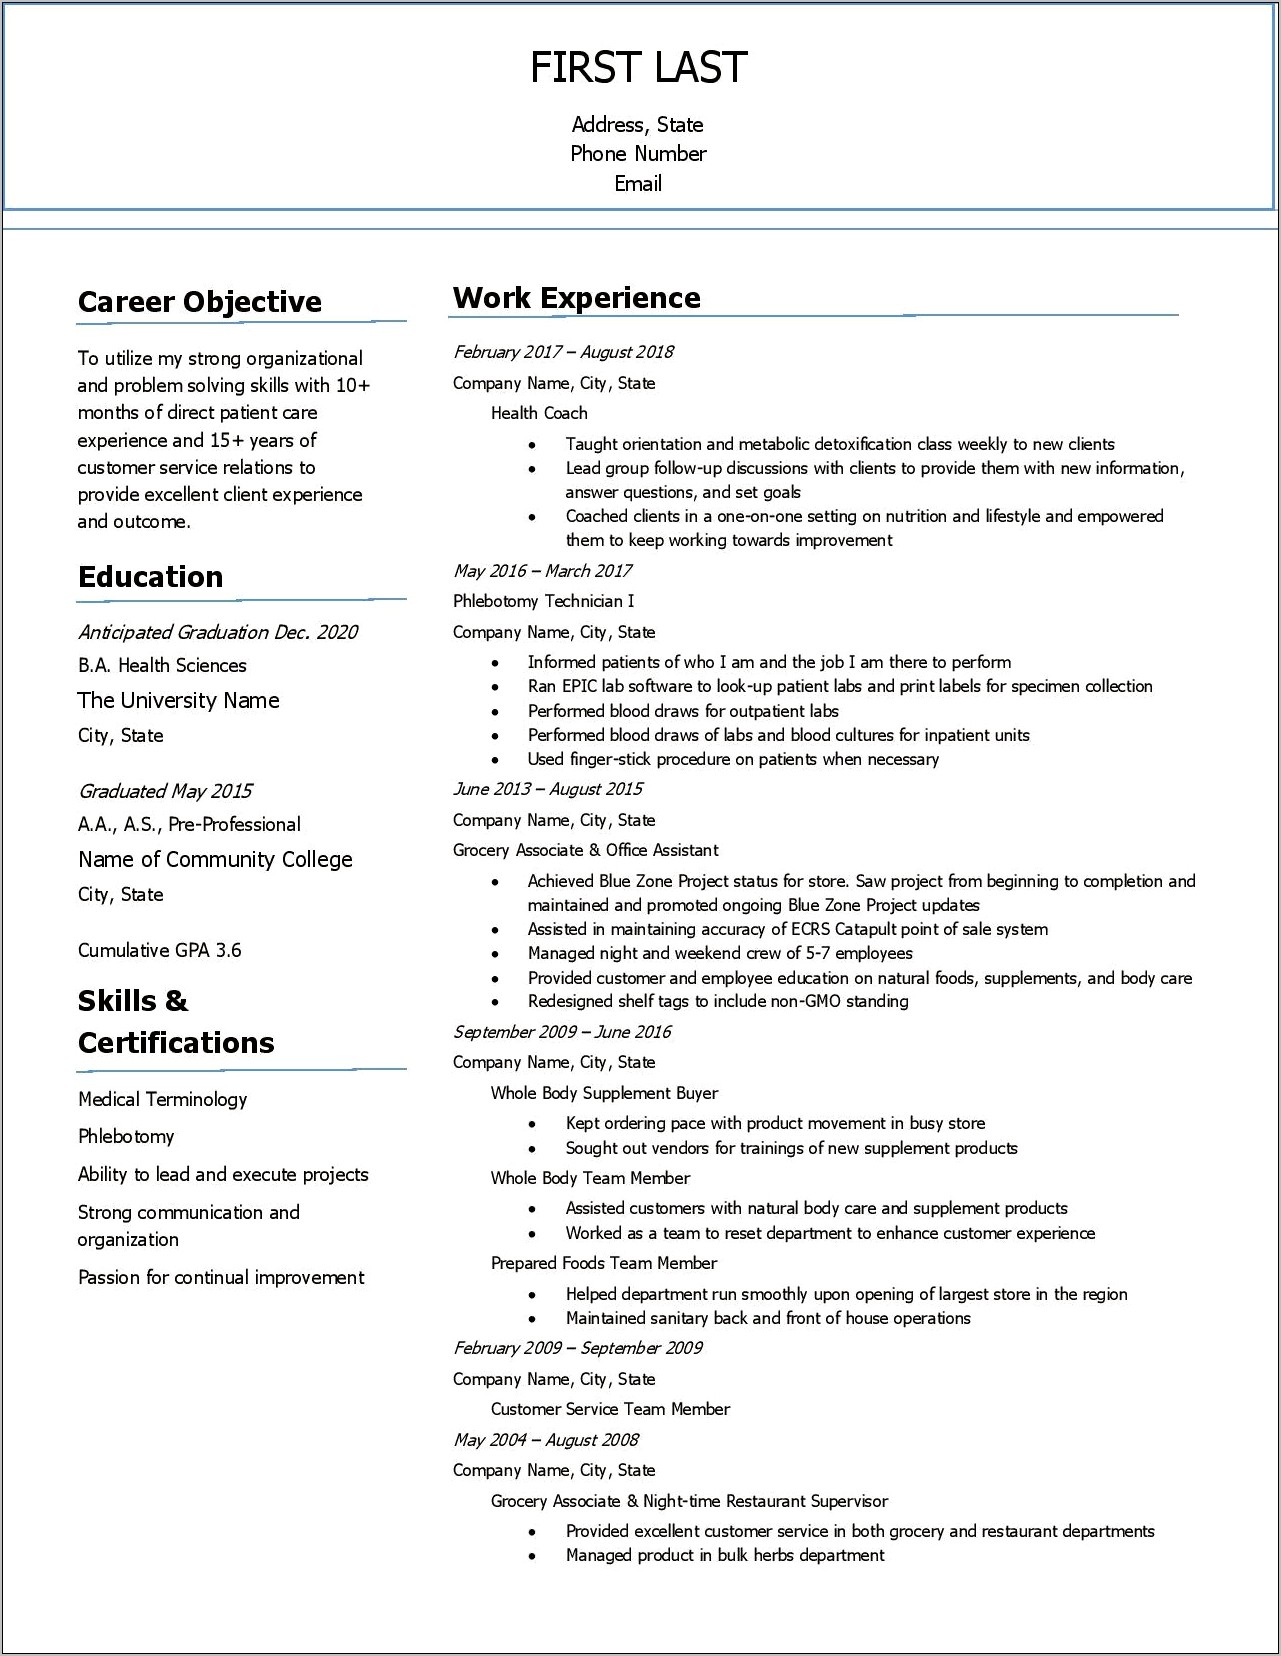 Resume After Being Out Of Work For Years